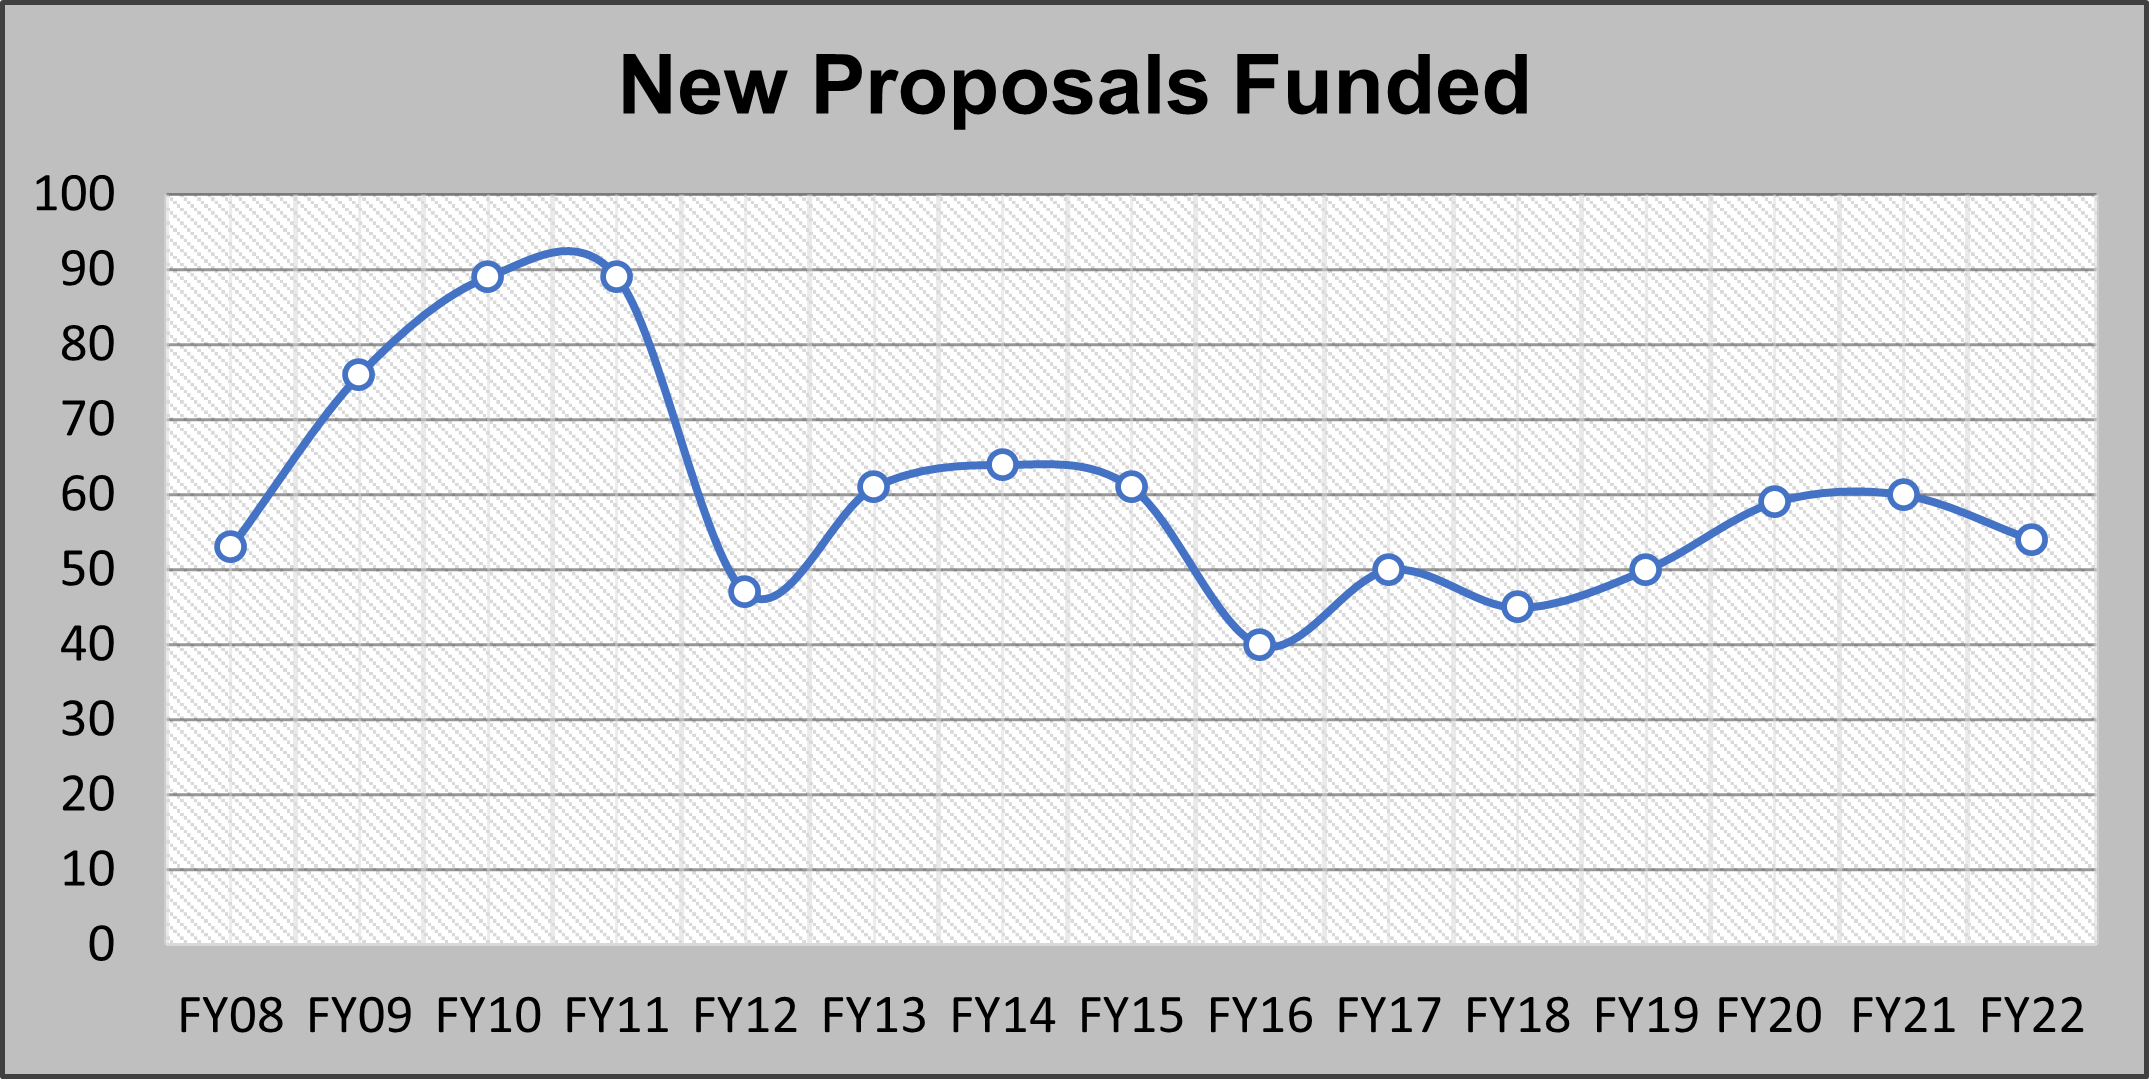 Chart of new proposals that have been funded from FY08 to FY22